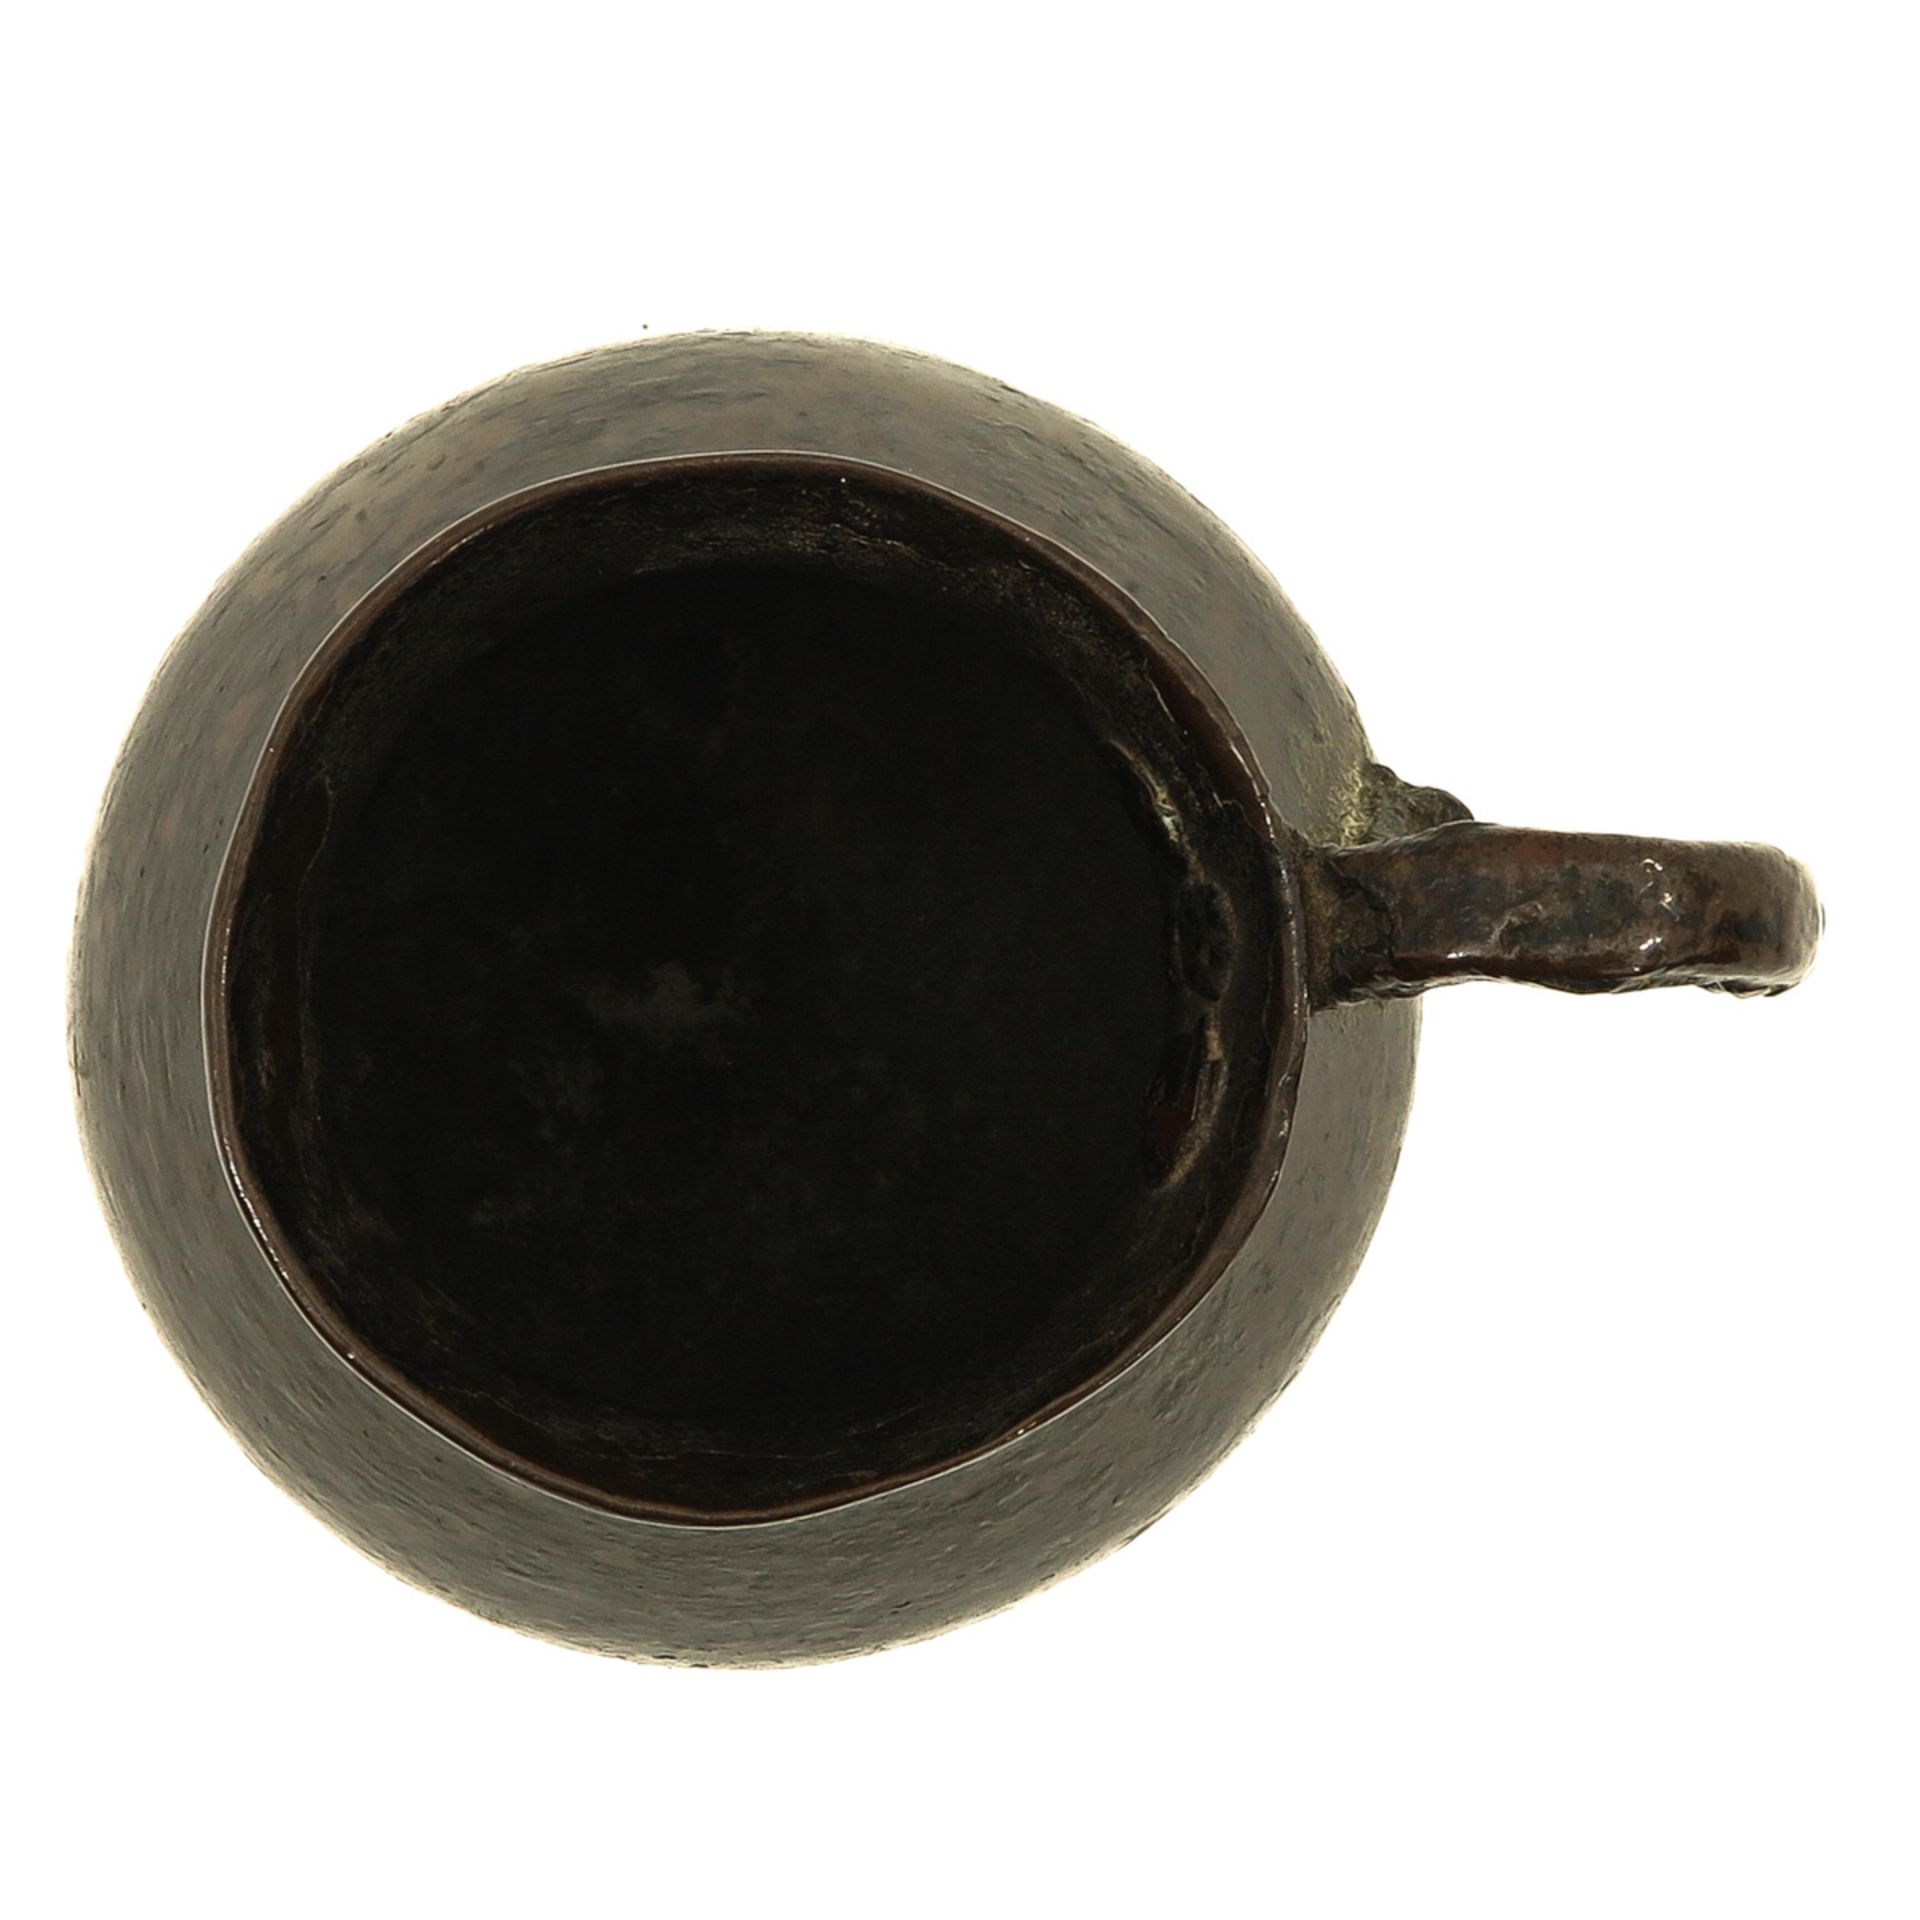 A 14th Century Bronze Measuring Cup - Image 6 of 9